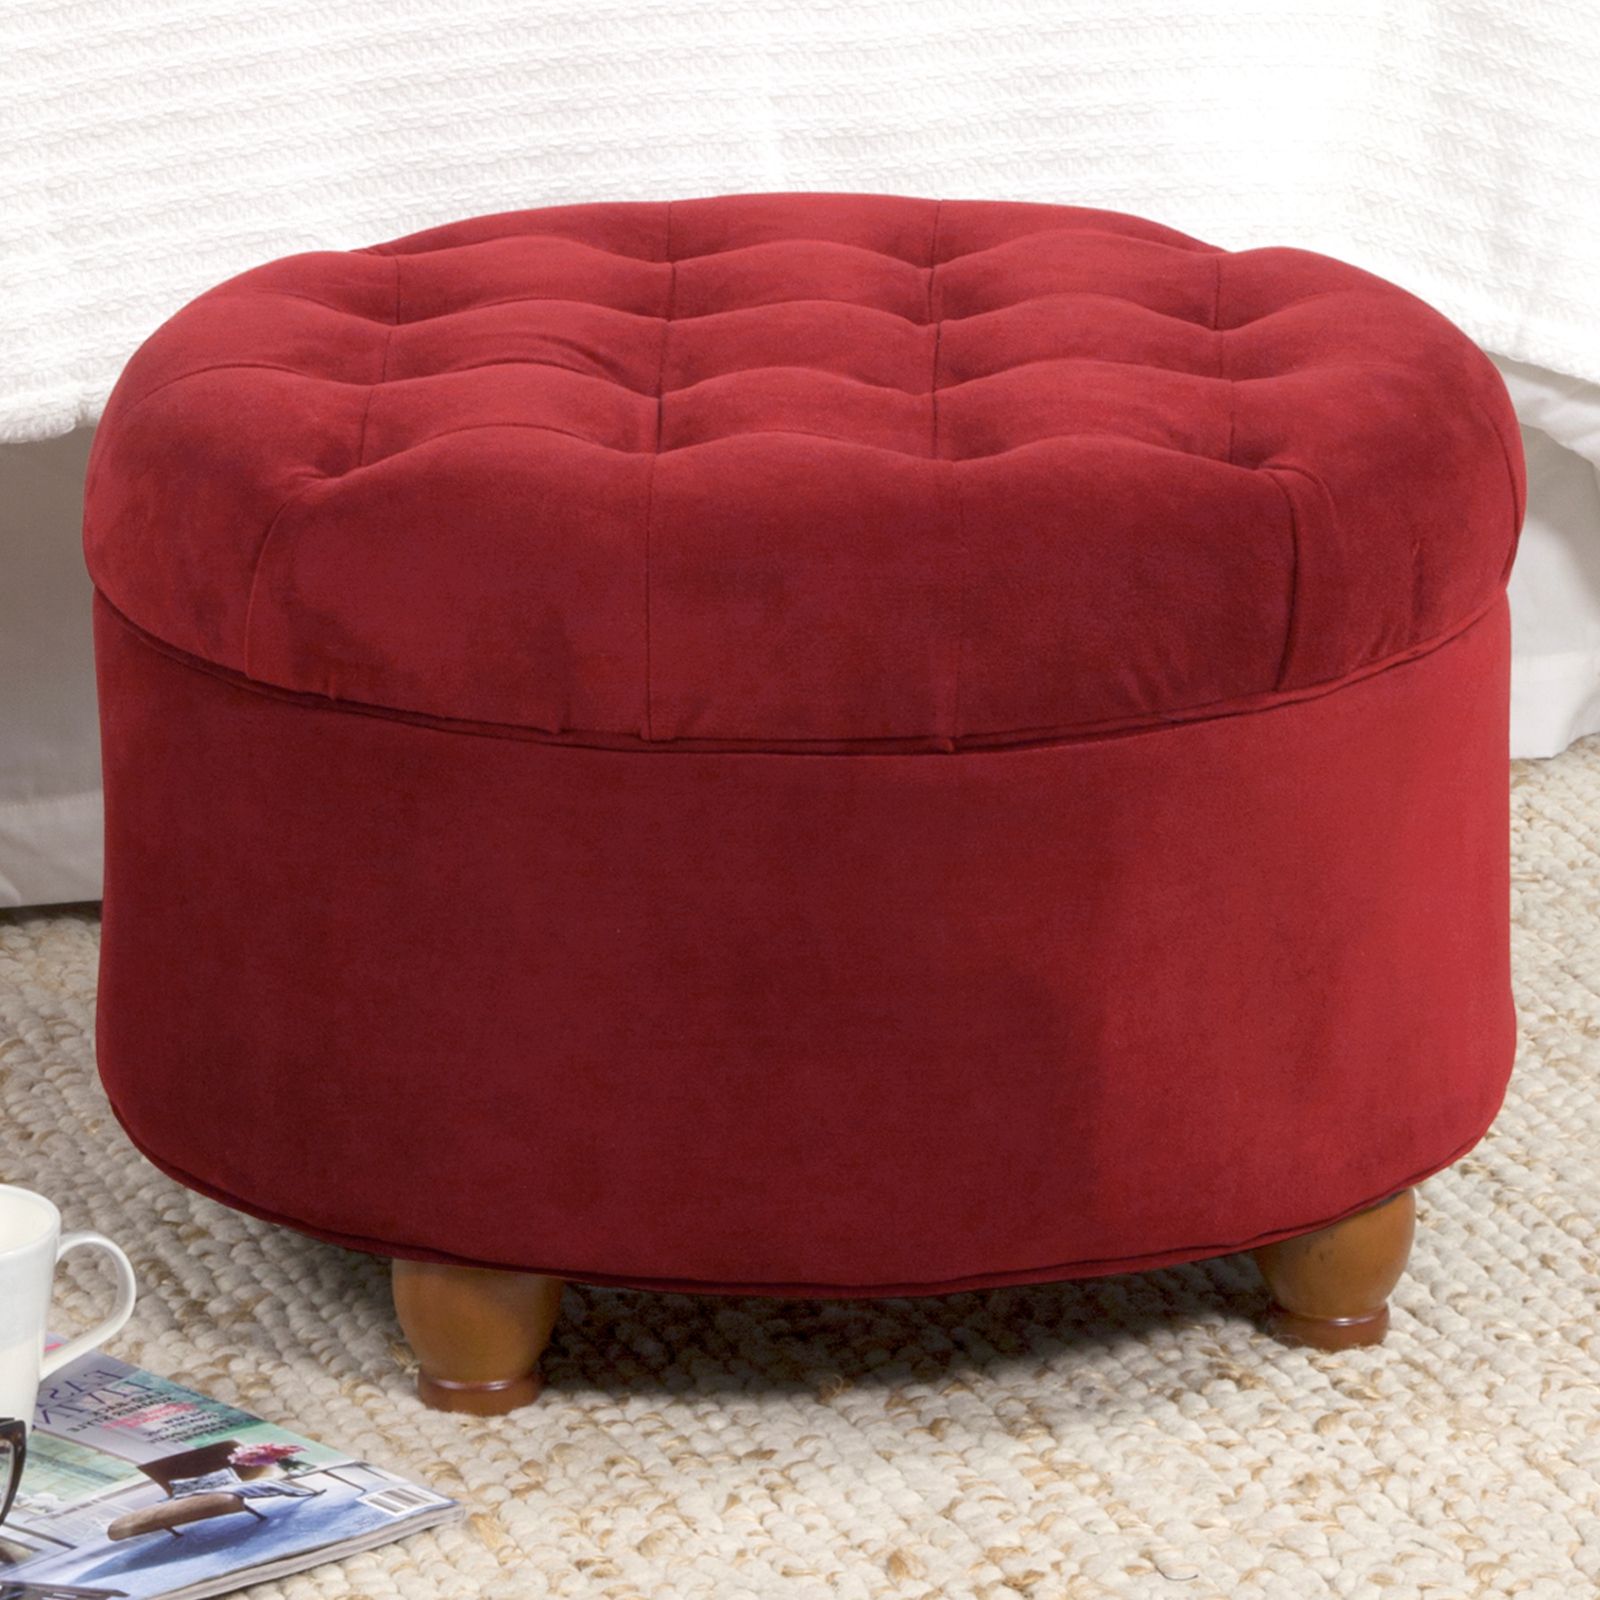 Velvet Tufted Storage Ottomans Throughout Well Known Kinfine Velvet Tufted Storage Ottoman – Ottomans At Hayneedle (View 2 of 10)